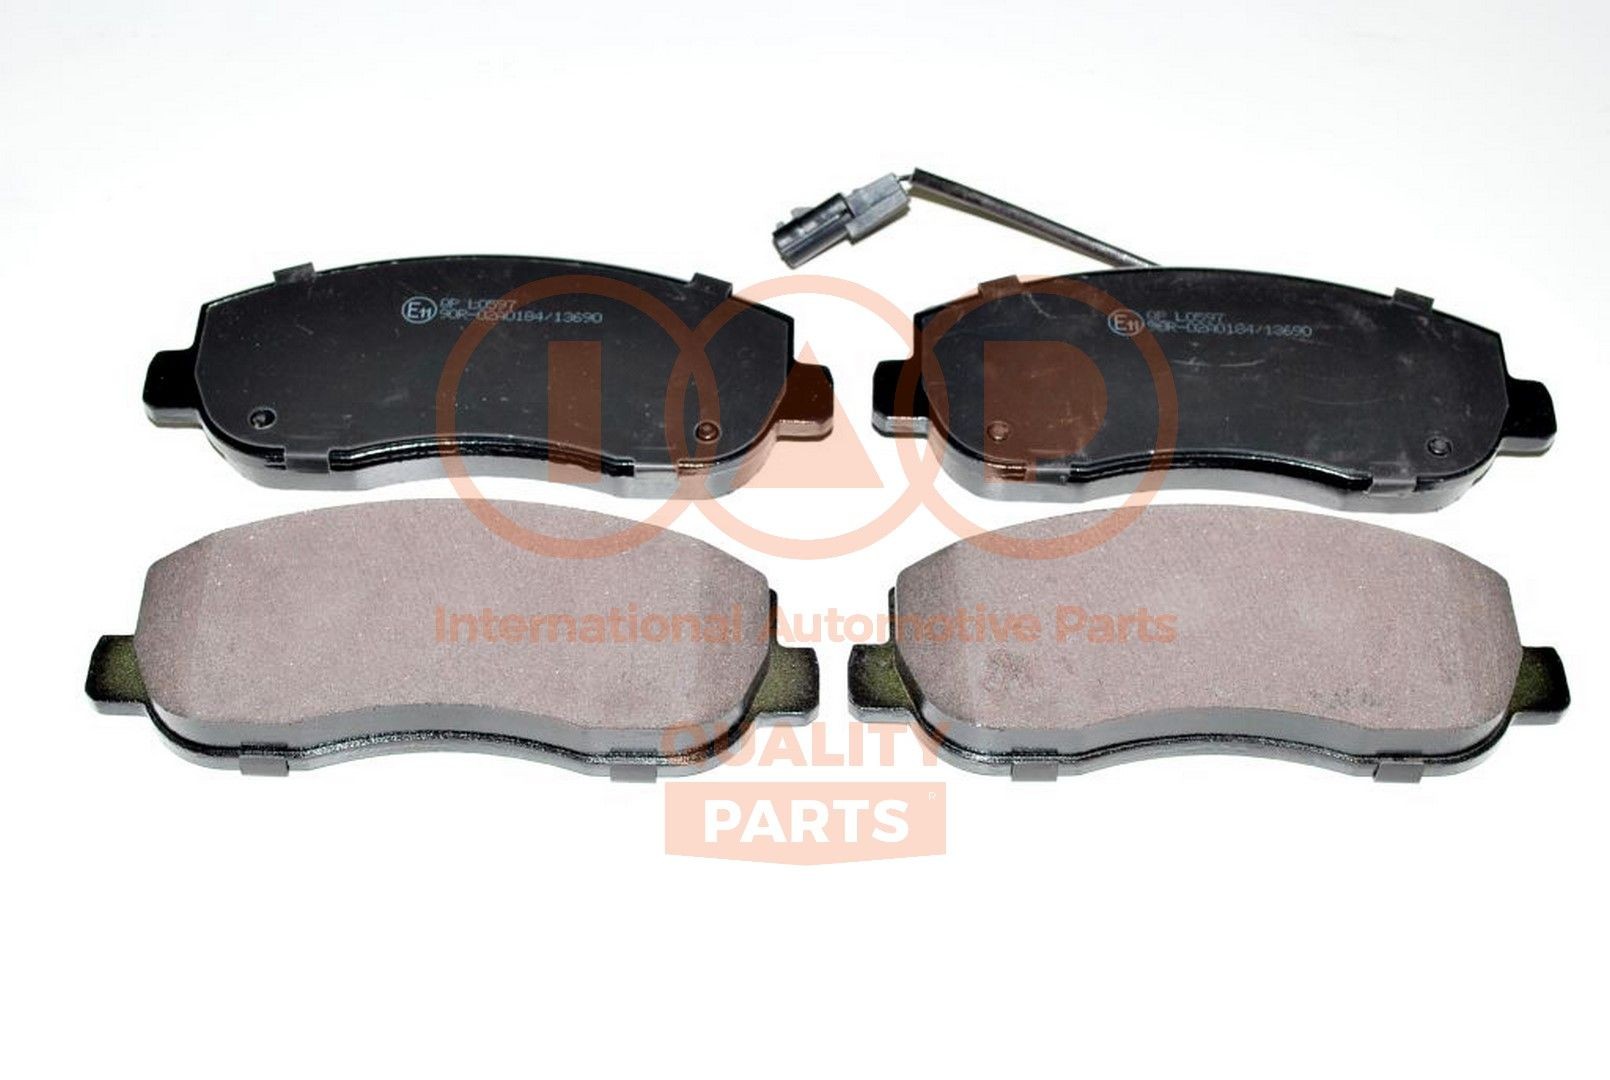 IAP QUALITY PARTS Front Axle Height 1: 64,6mm, Width 1: 163,4mm, Thickness 1: 18, 17,9mm Brake pads 704-13221 buy